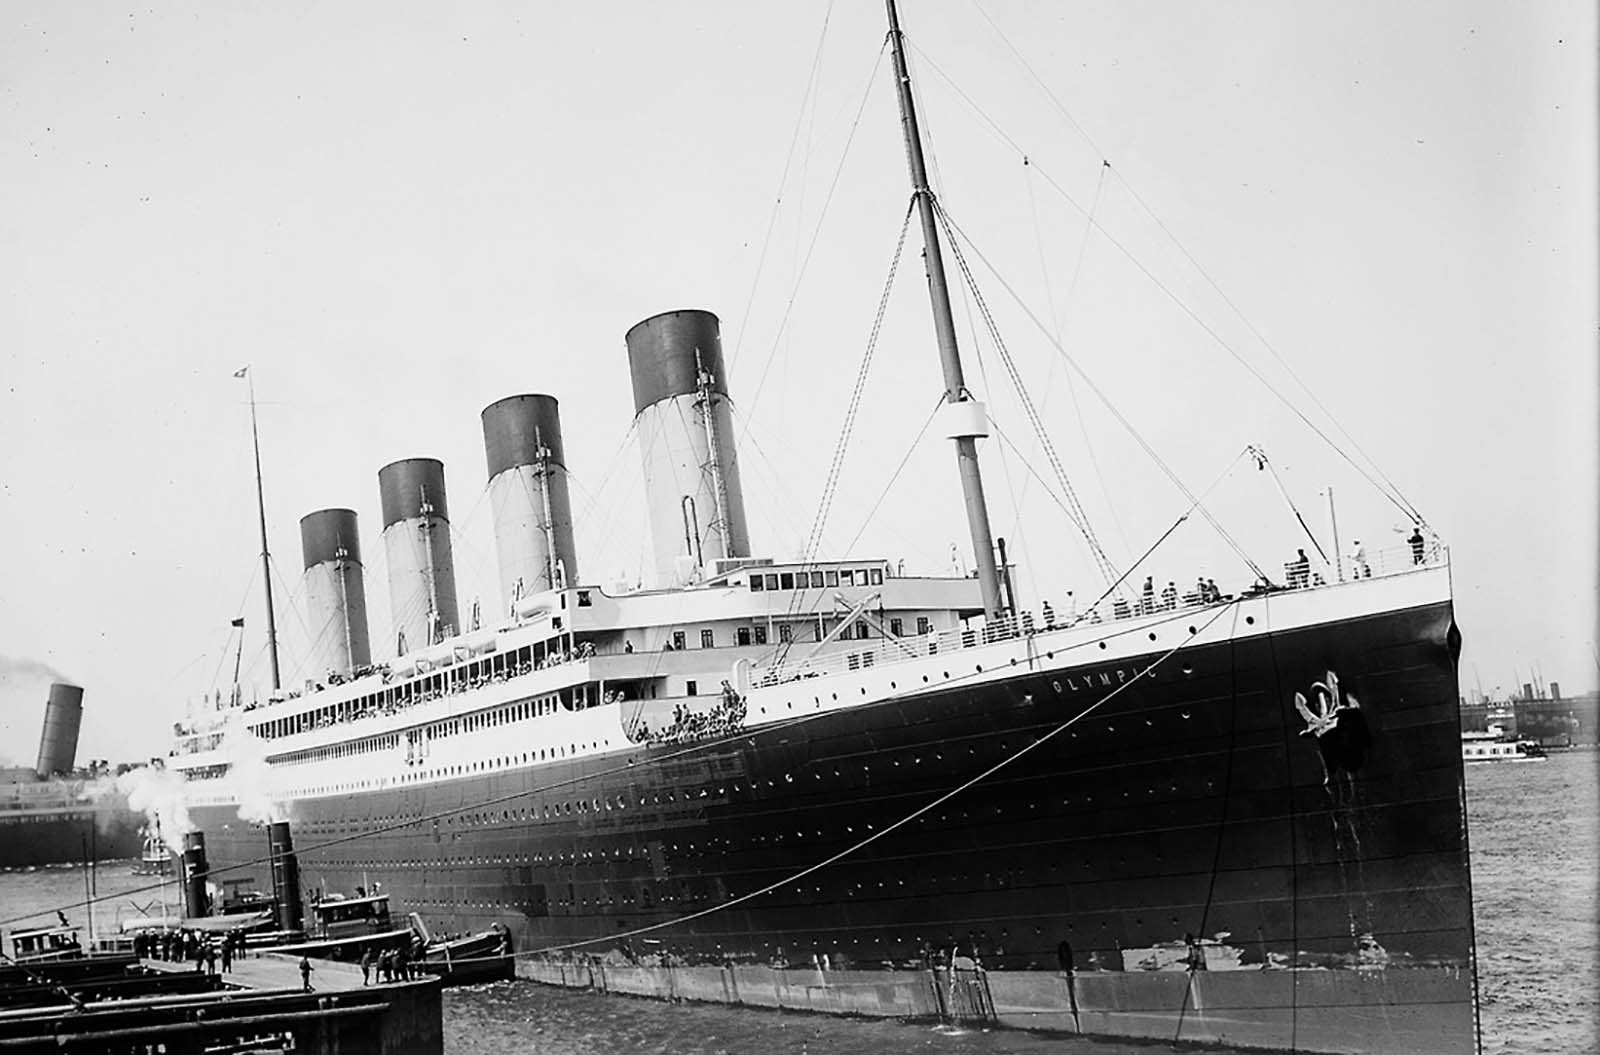 The Photographic History of RMS RMS Olympic, 1911-1935